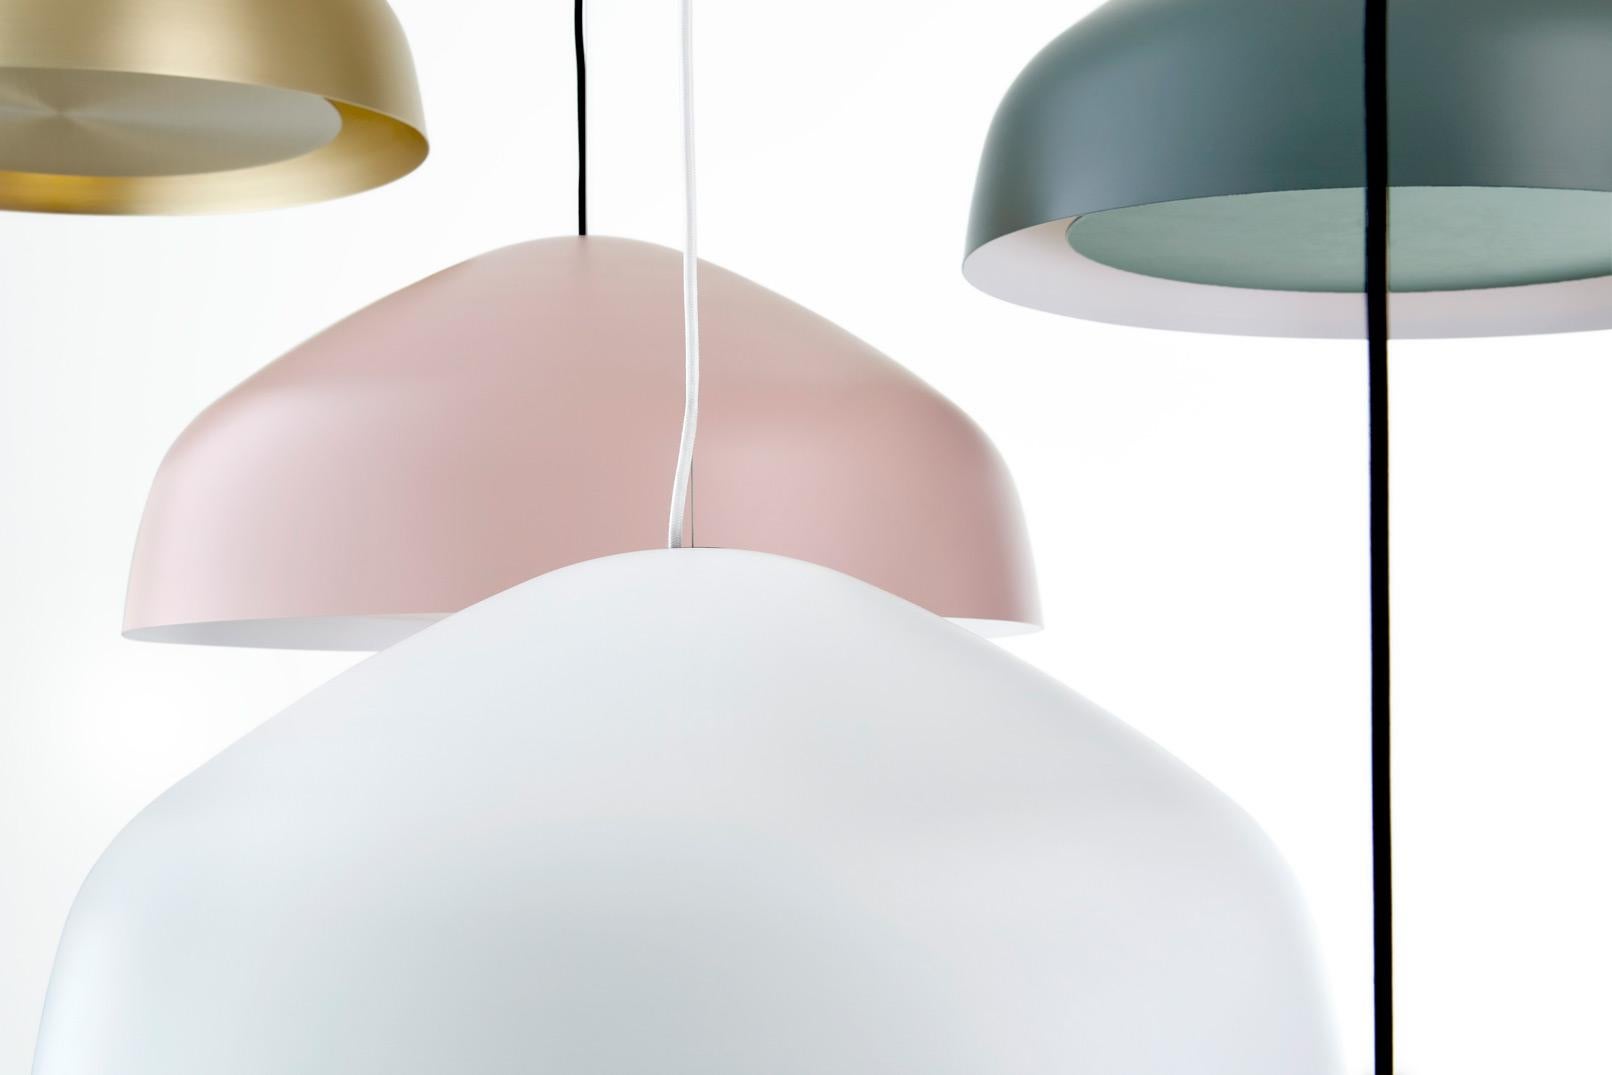 Sitting between the timeless and the contemporary, the Ora pendant by Ross Gardam, features a floating disk surrounded by a beautifully gentle glow. This striking aluminum pendant is hand-spun and includes a 5